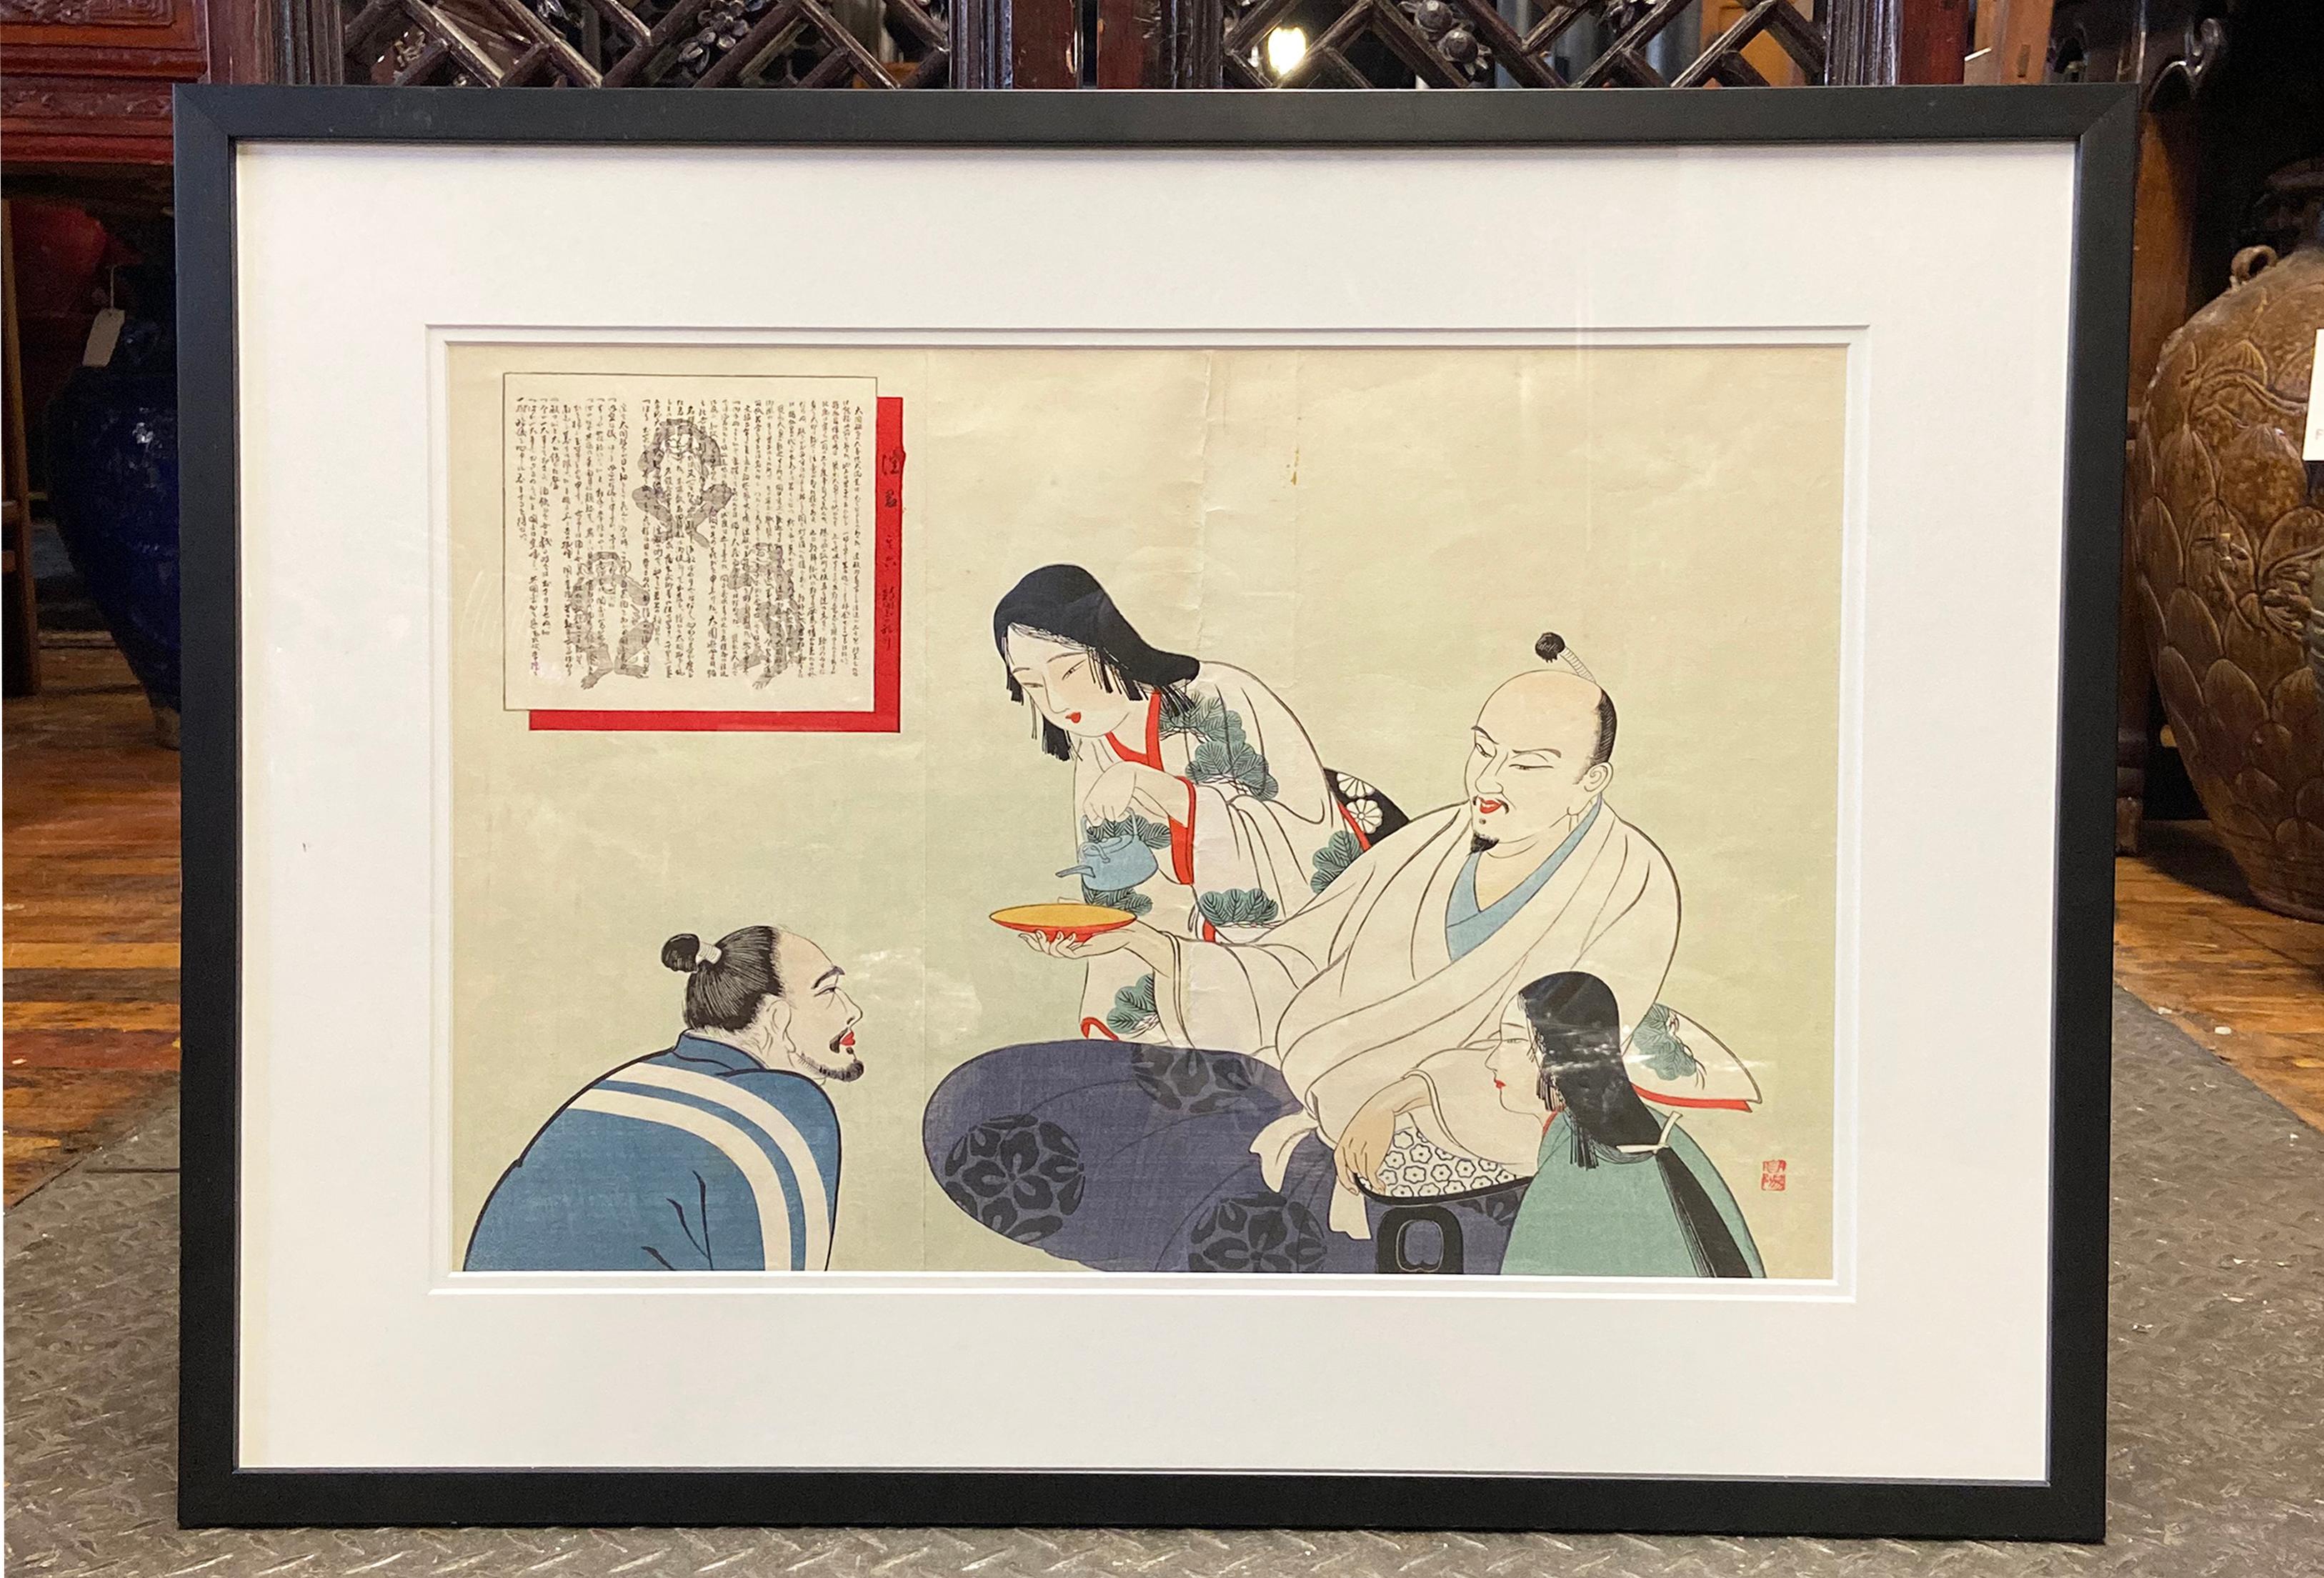 An antique Japanese woodblock print from the 19th century depicting monks having tea. Created in Japan during the 19th century, this woodblock print showcases an indoor scene featuring monks having tea. Two women flanking a monk, are facing a fourth